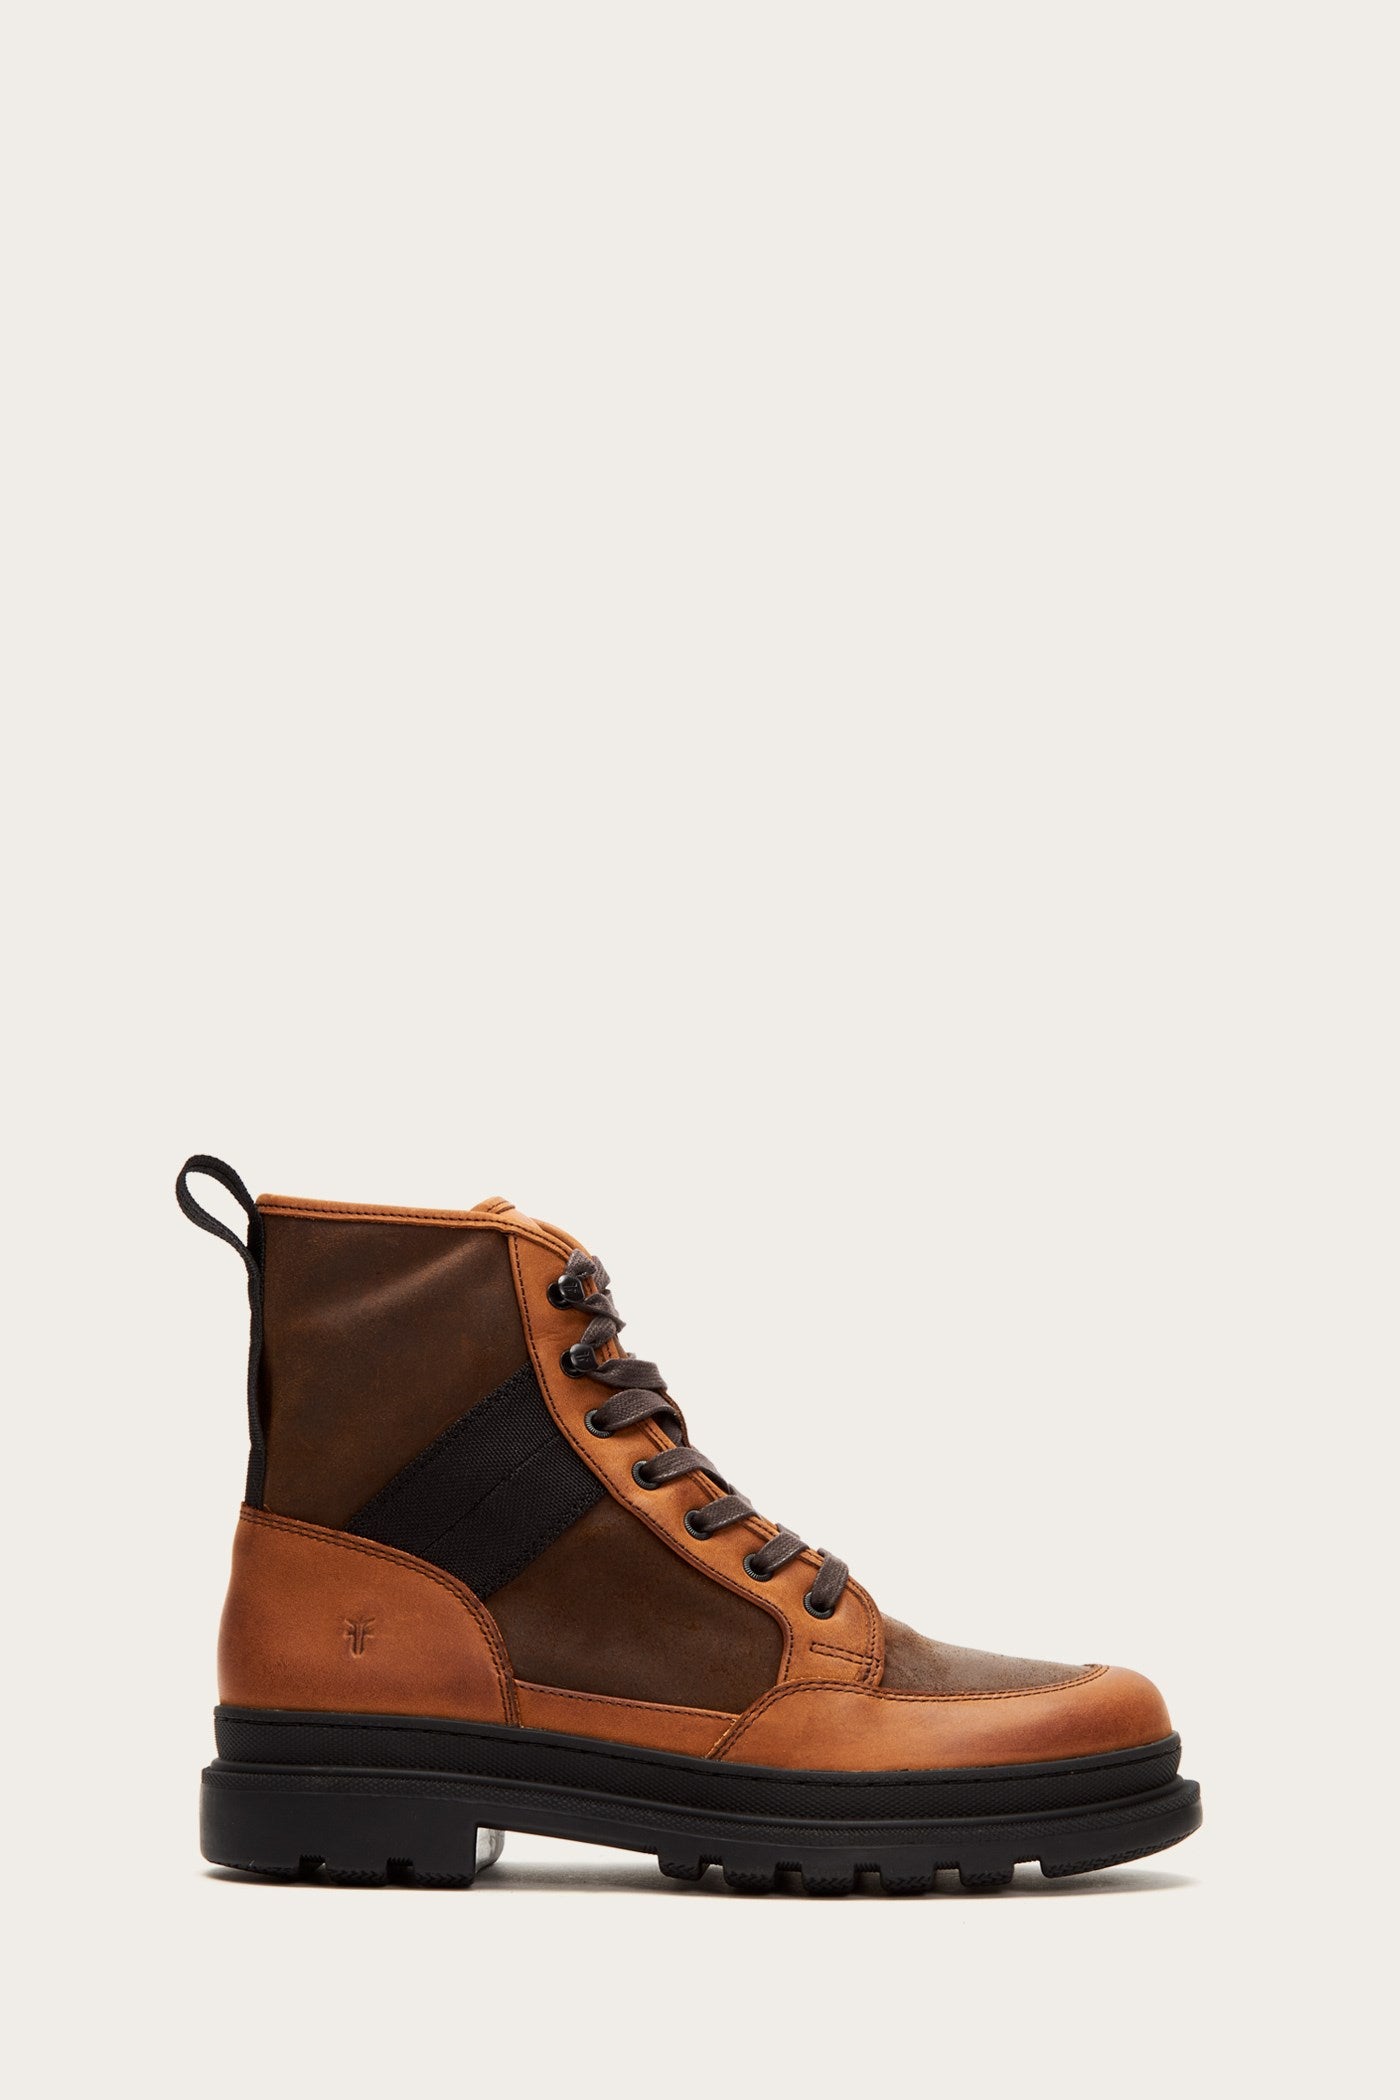 Scout Boot | The Frye Company